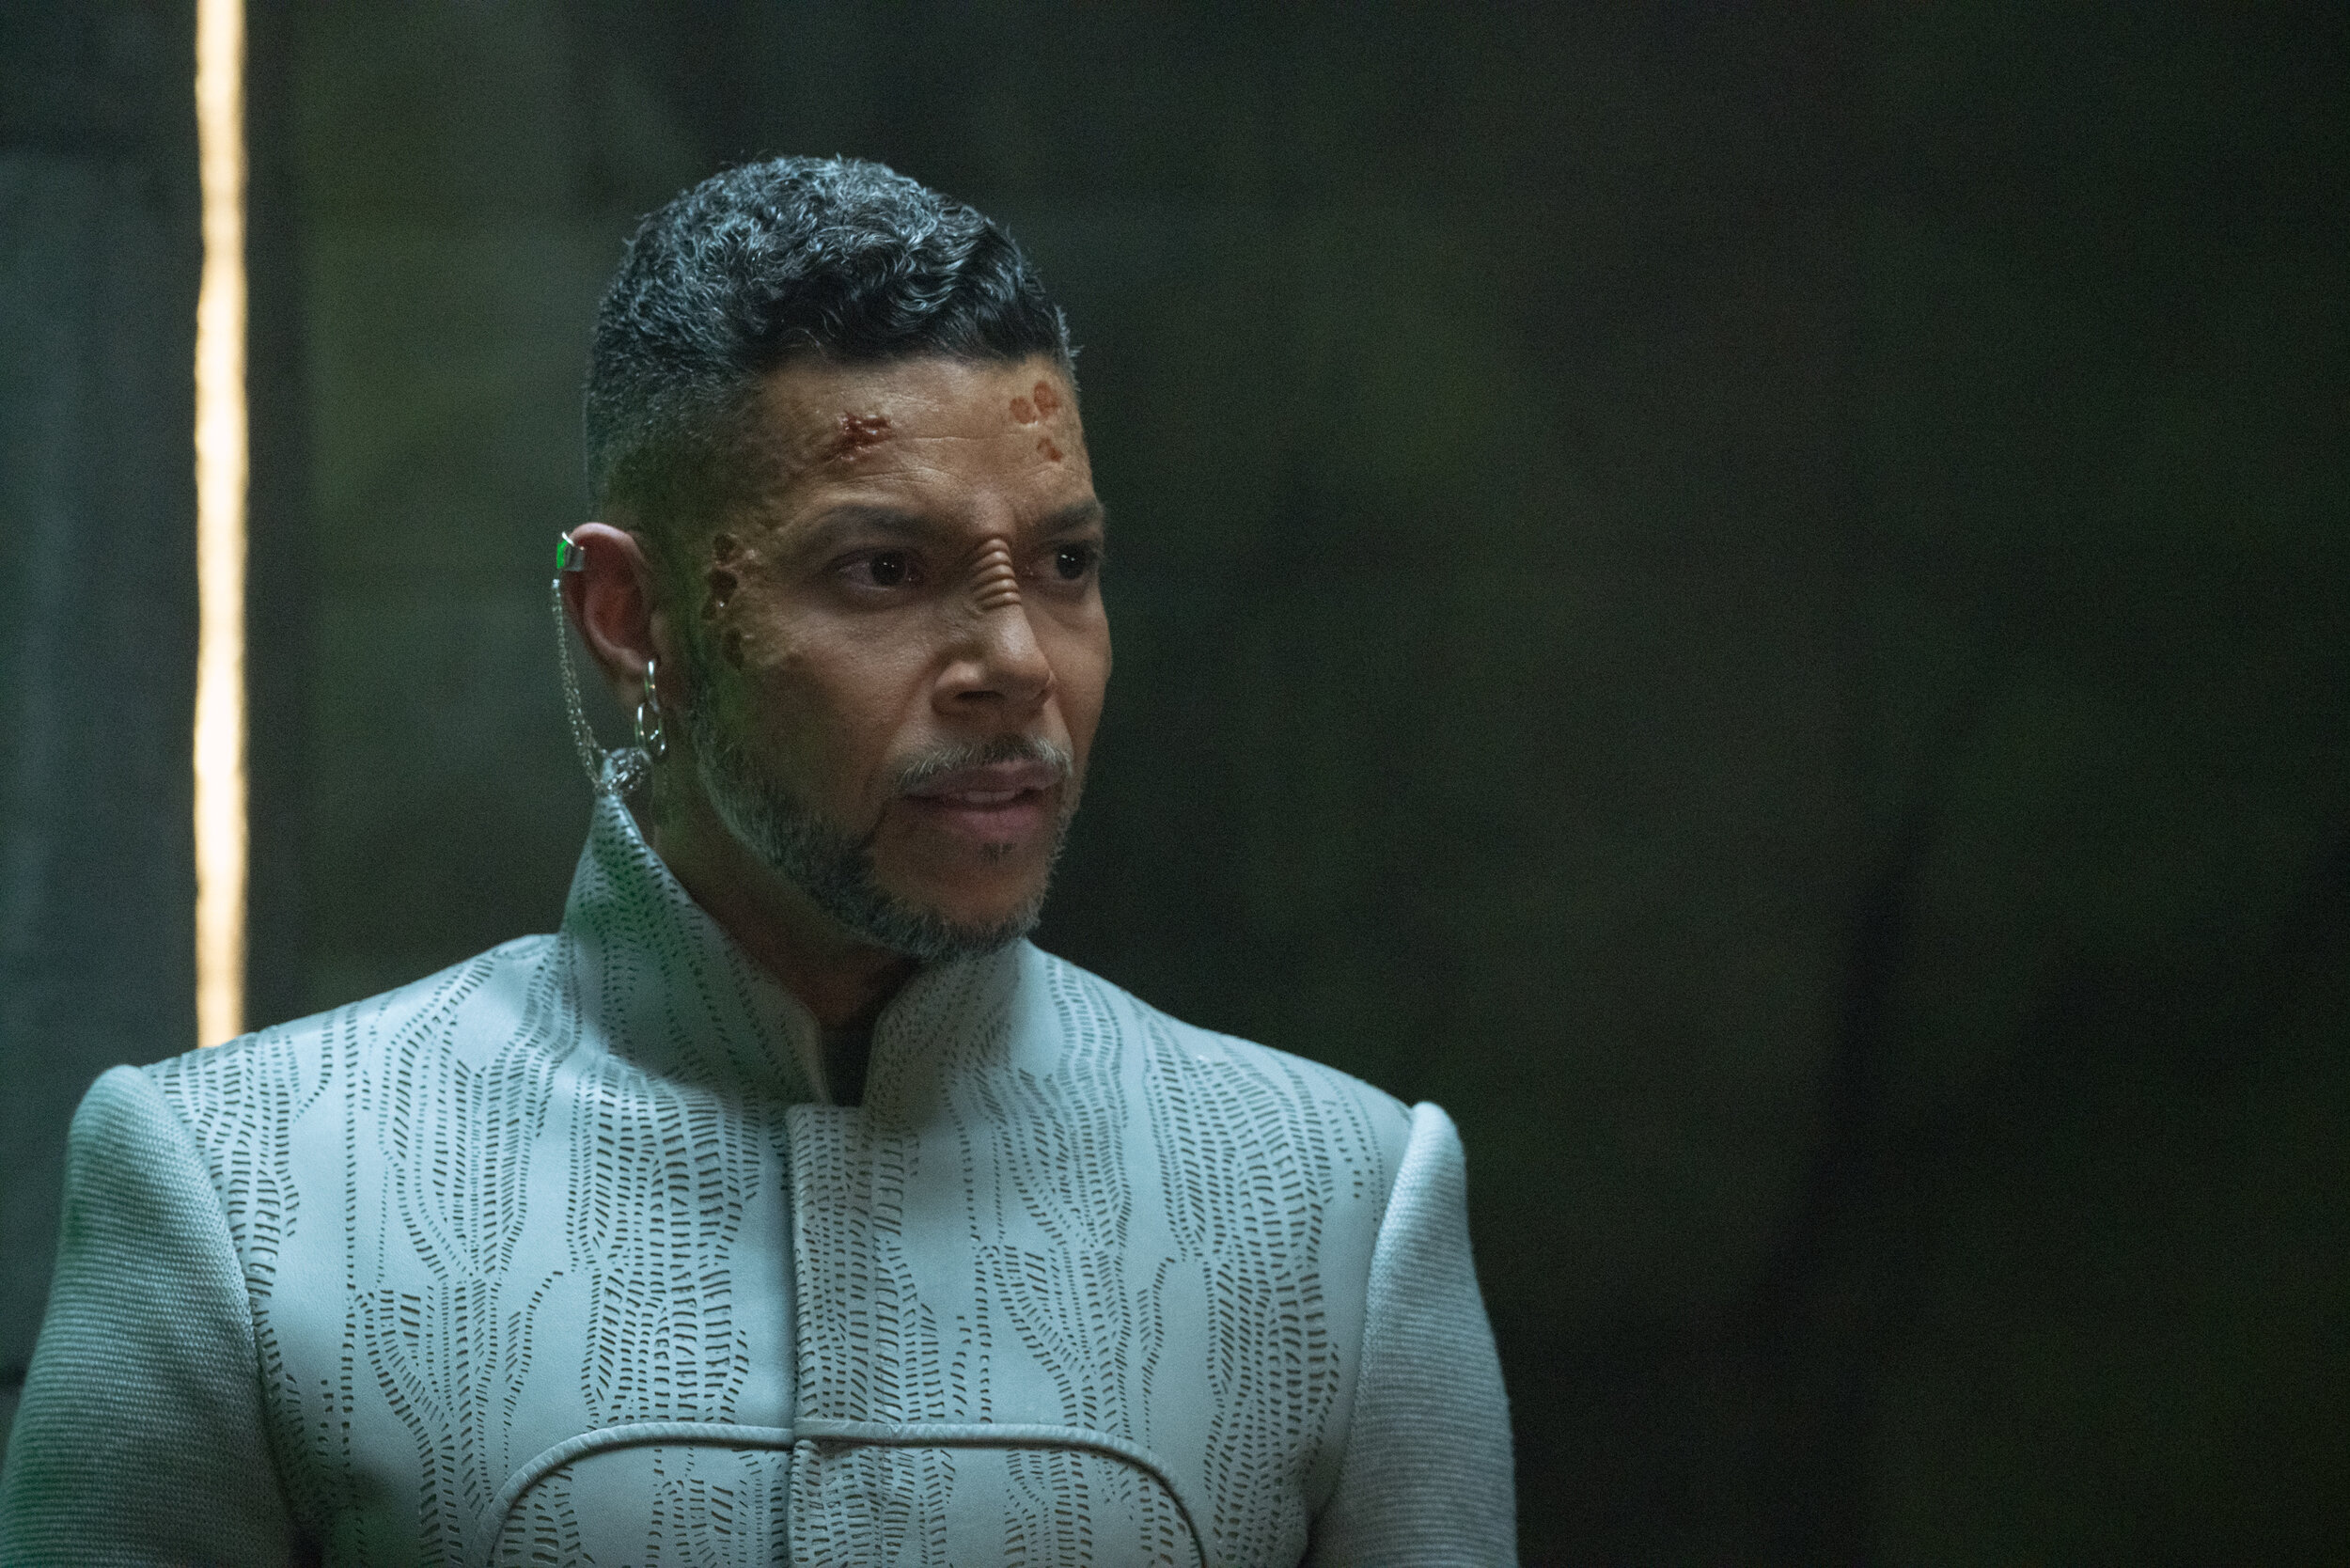   "The Hope That is You, Part 2" -- Ep#313 -- Pictured: Wilson Cruz as Dr. Hugh Culber of the CBS All Access series STAR TREK: DISCOVERY. Photo Cr: Michael Gibson/CBS ©2020 CBS Interactive, Inc. All Rights Reserved.  